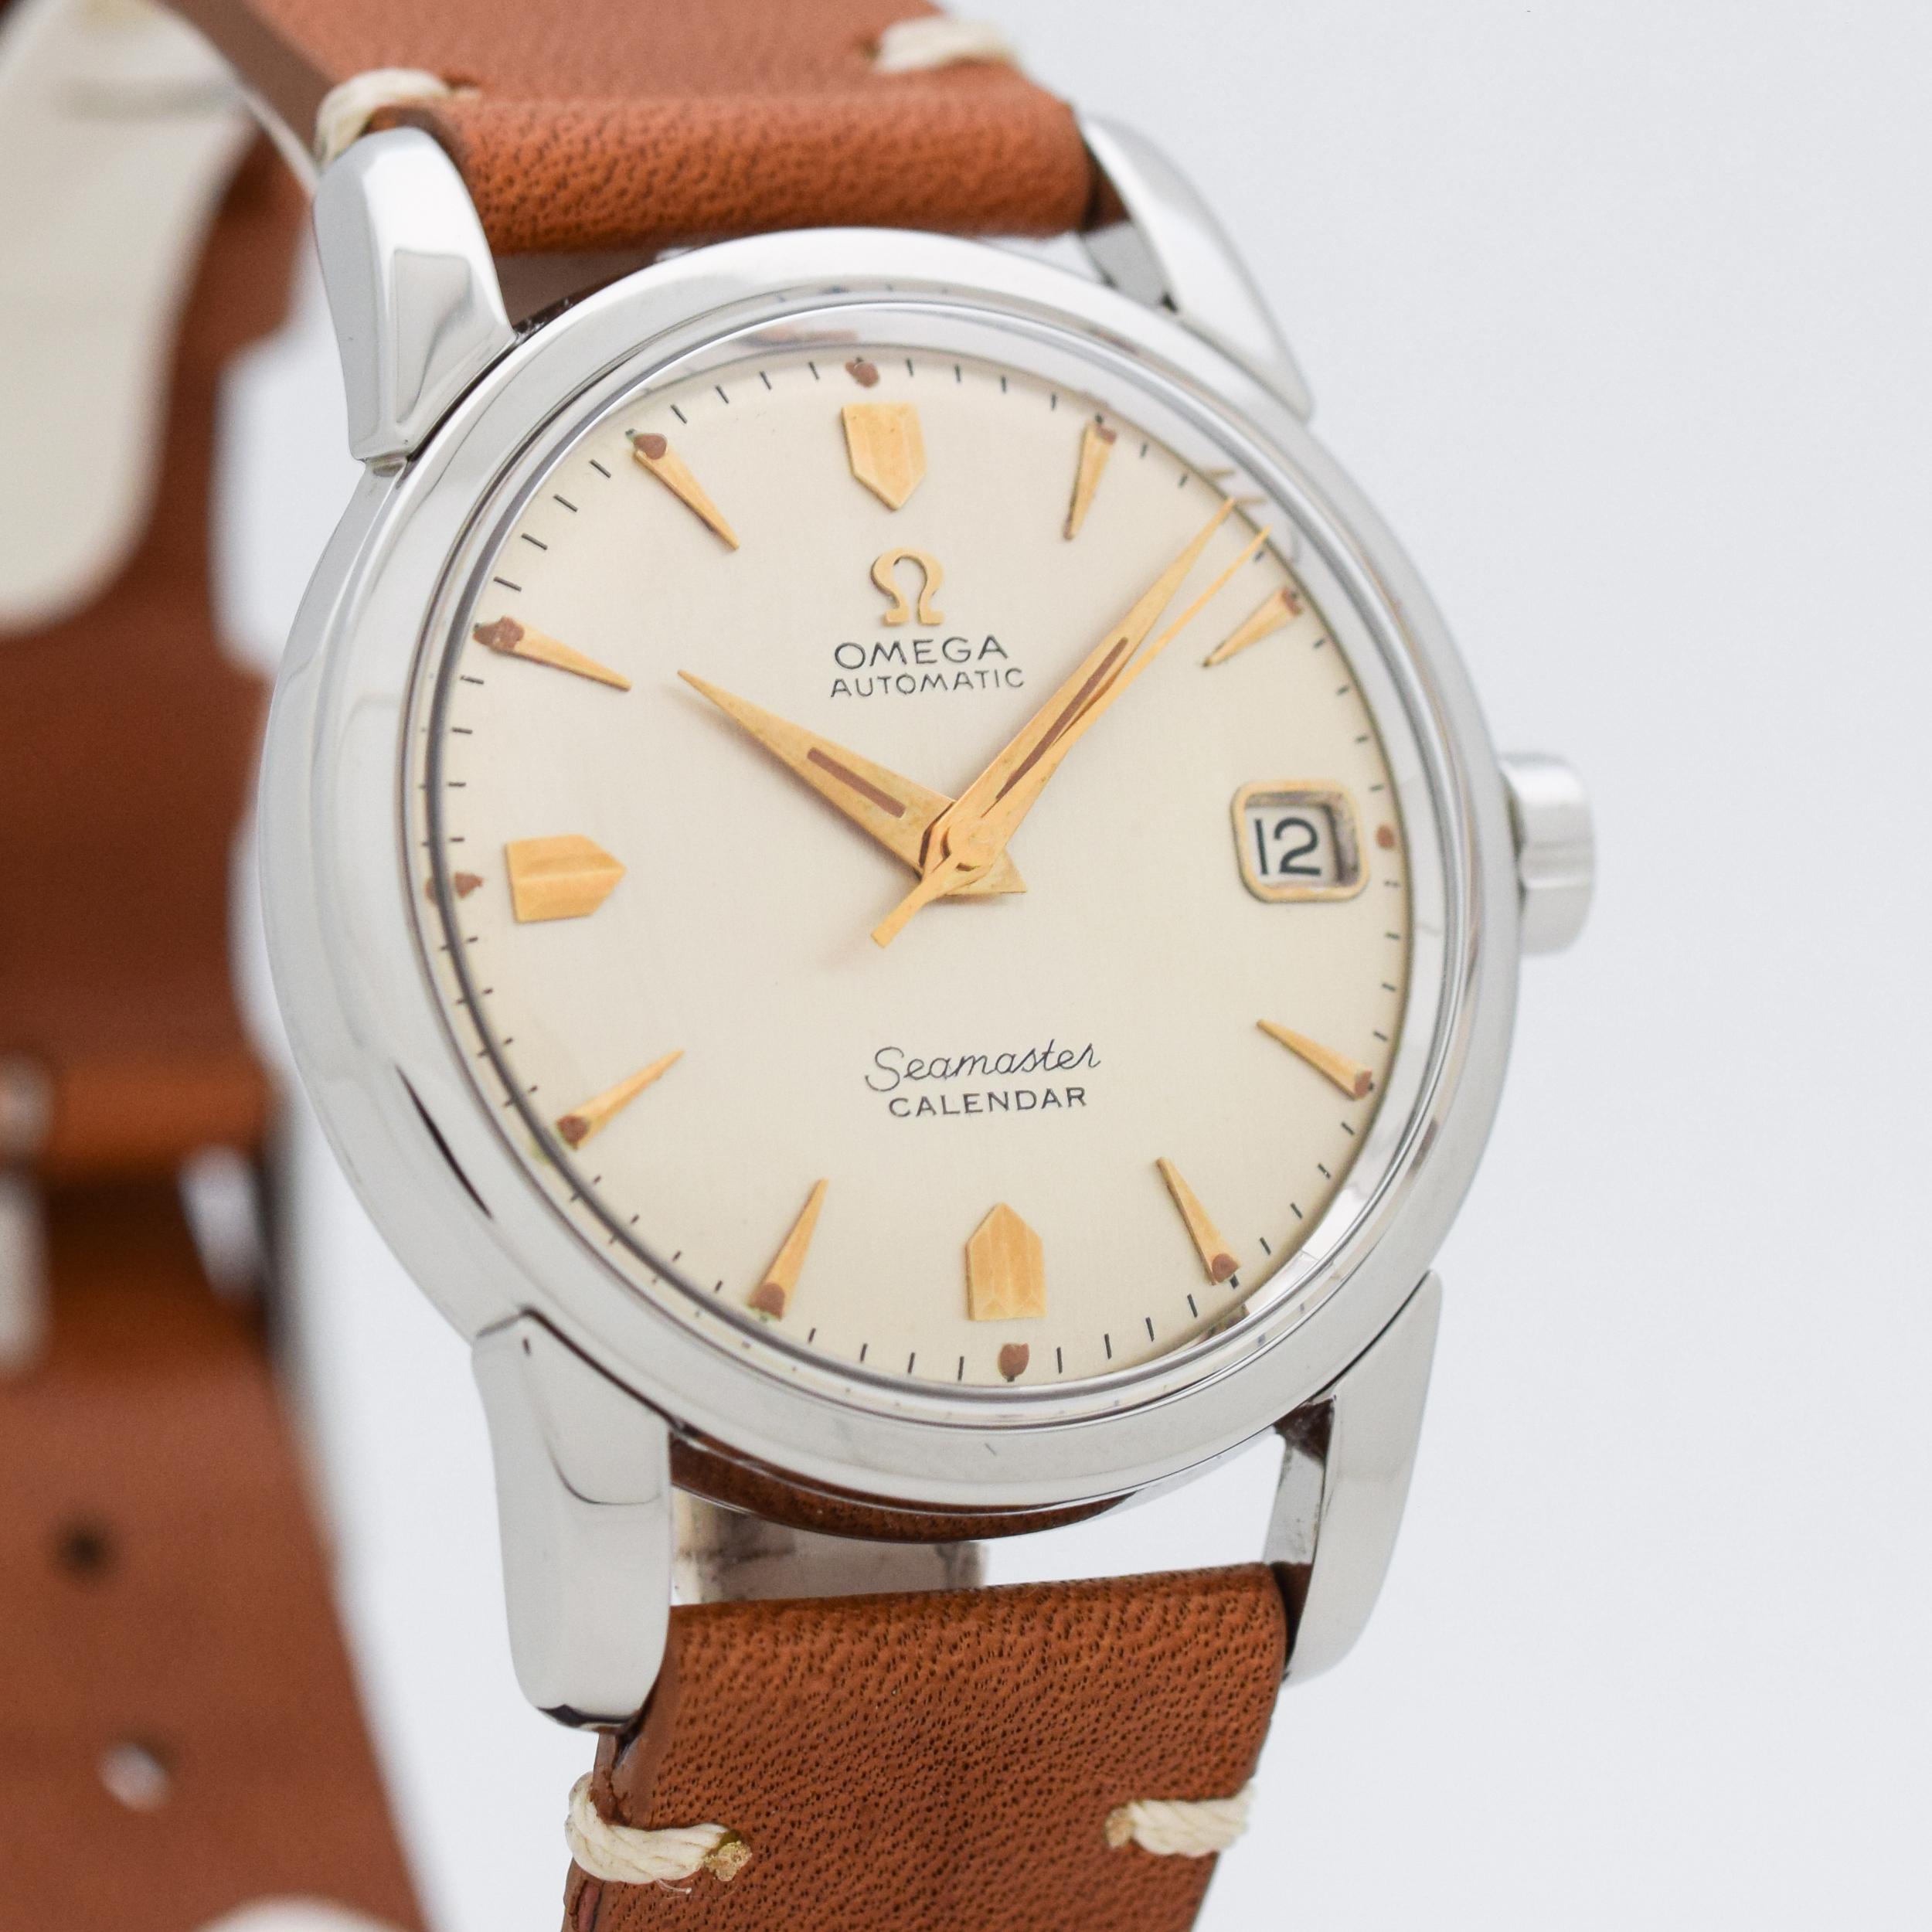 1957 Vintage Omega Seamaster Calendar Reference 2846-3-SC. Stainless Steel case, that measures in at 34mm wide. Original, but restored silver dial. Date function. Powered by a 20-jewel, automatic caliber movement. Equipped with a Genuine Horween